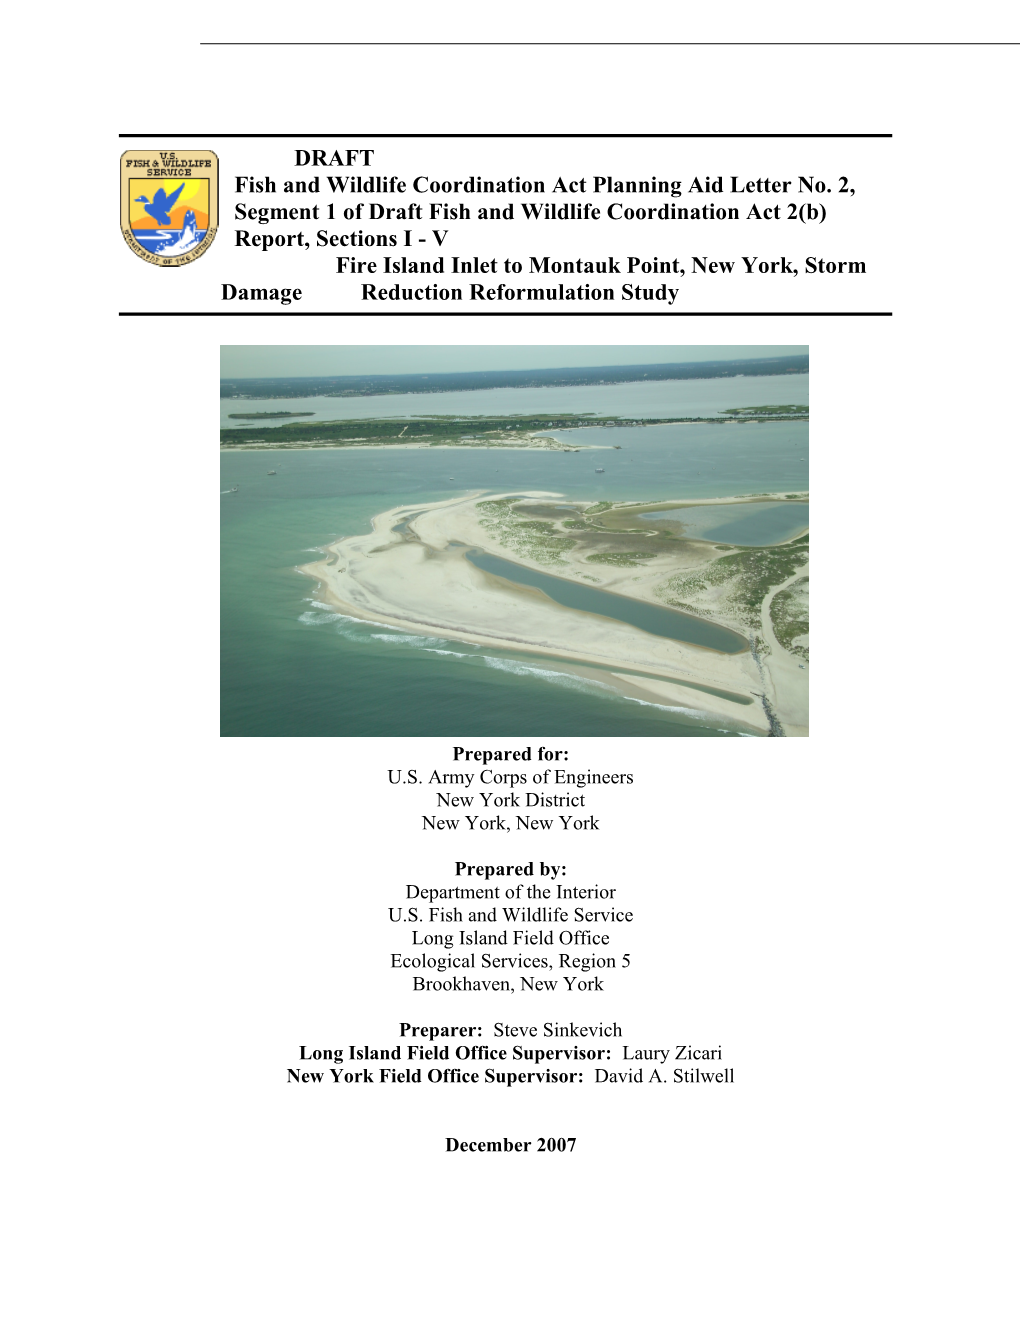 Fish and Wildlife Coordination Act Planning Aid Letter No. 2, Segment 1 of Draft Fish